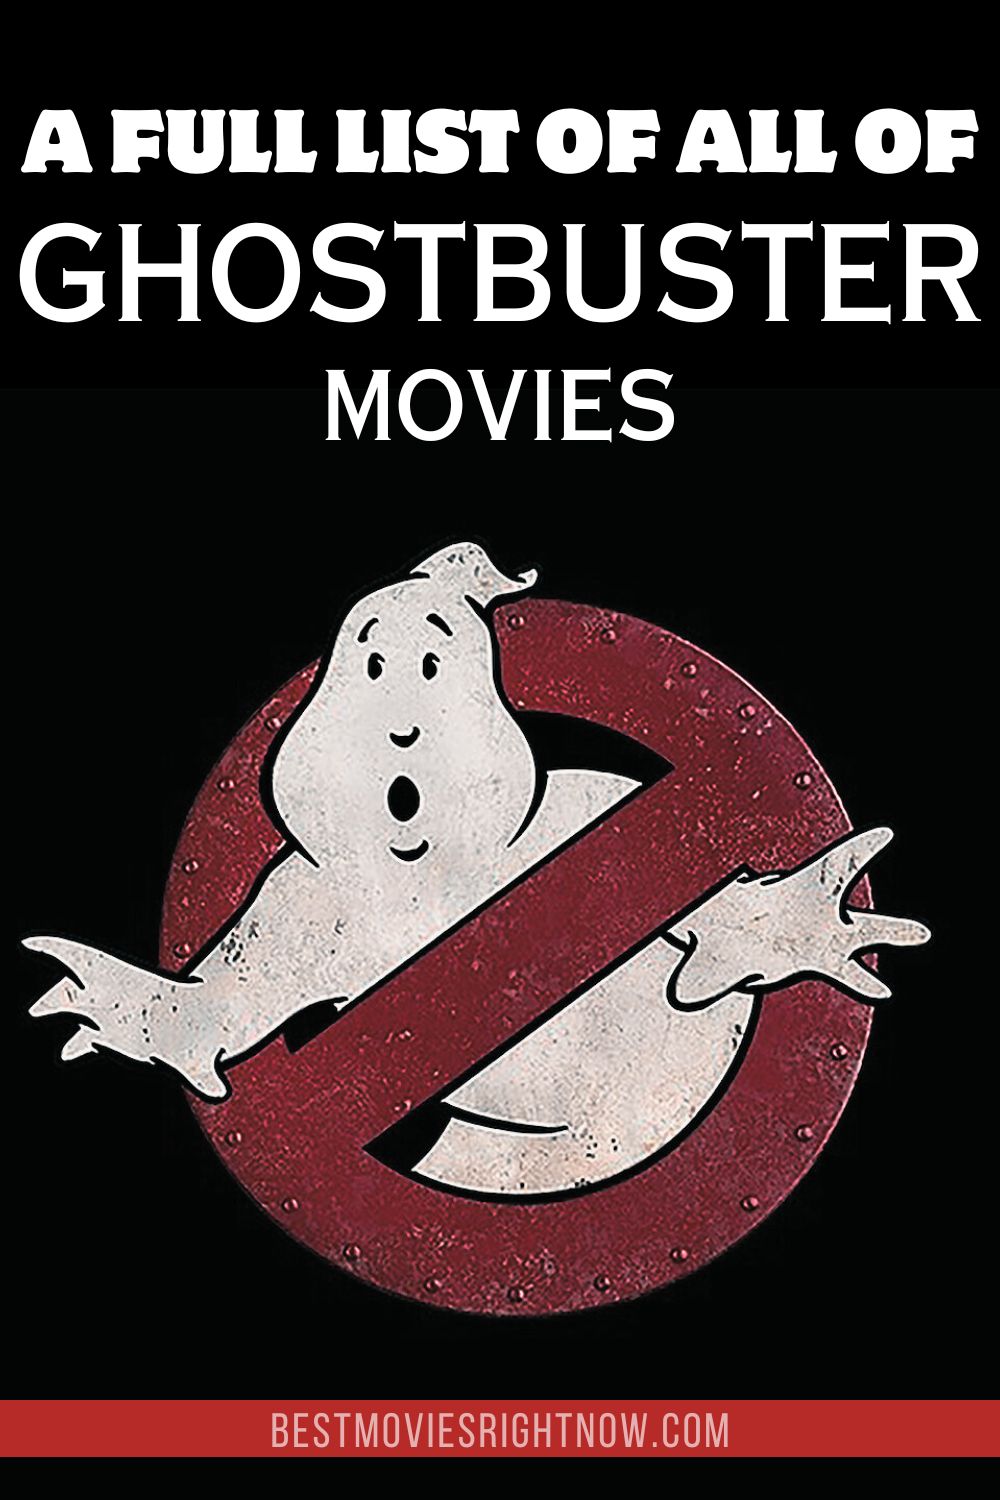 Ghostbuster Movies pin image